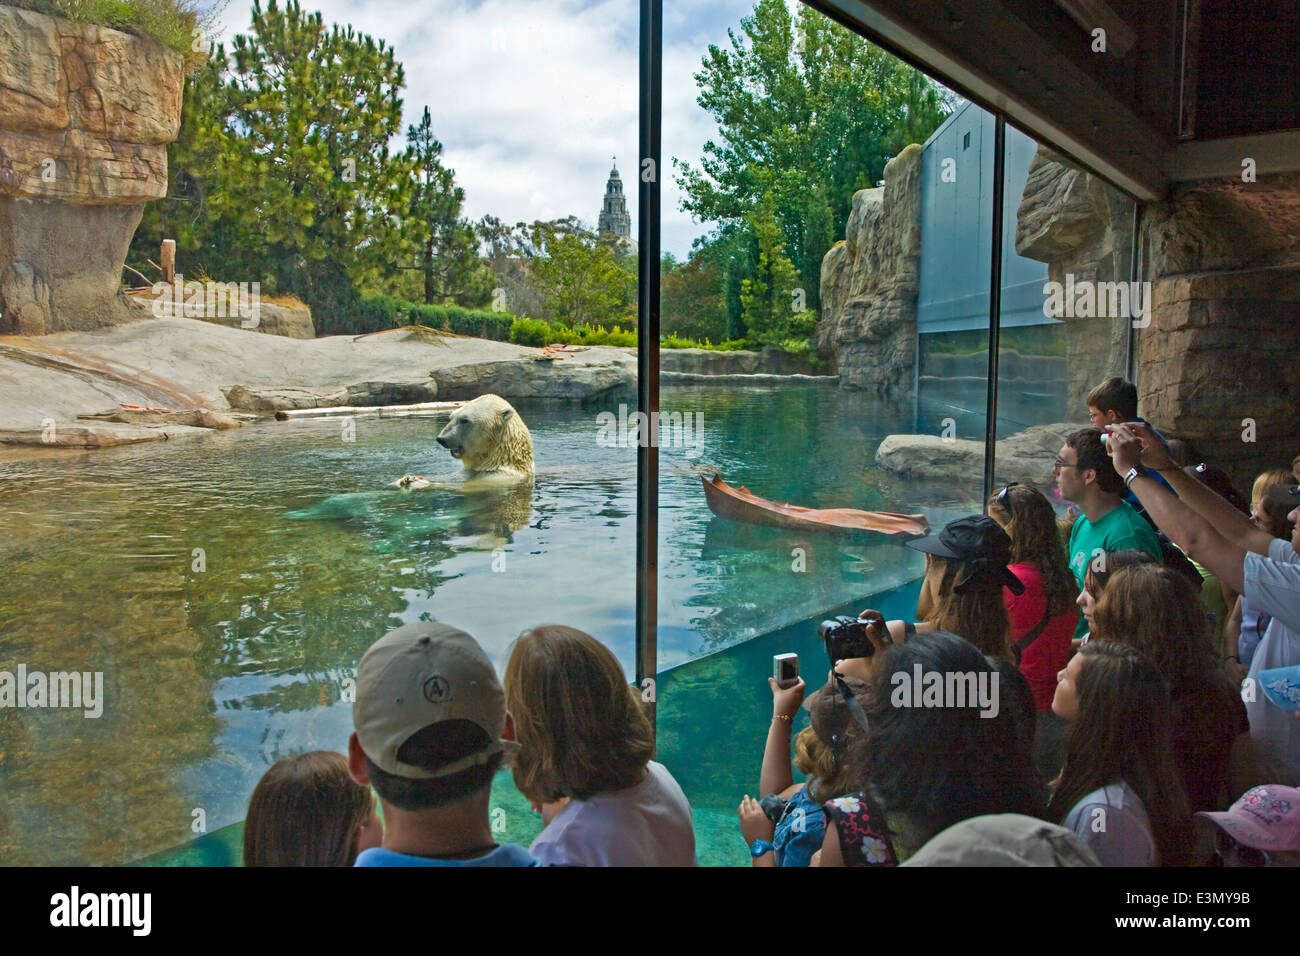 A POLAR BEAR (Ursus maritimus) in a pool is a real crowd pleaser at the SAN DIEGO ZOO - CALIFORNIA Stock Photo